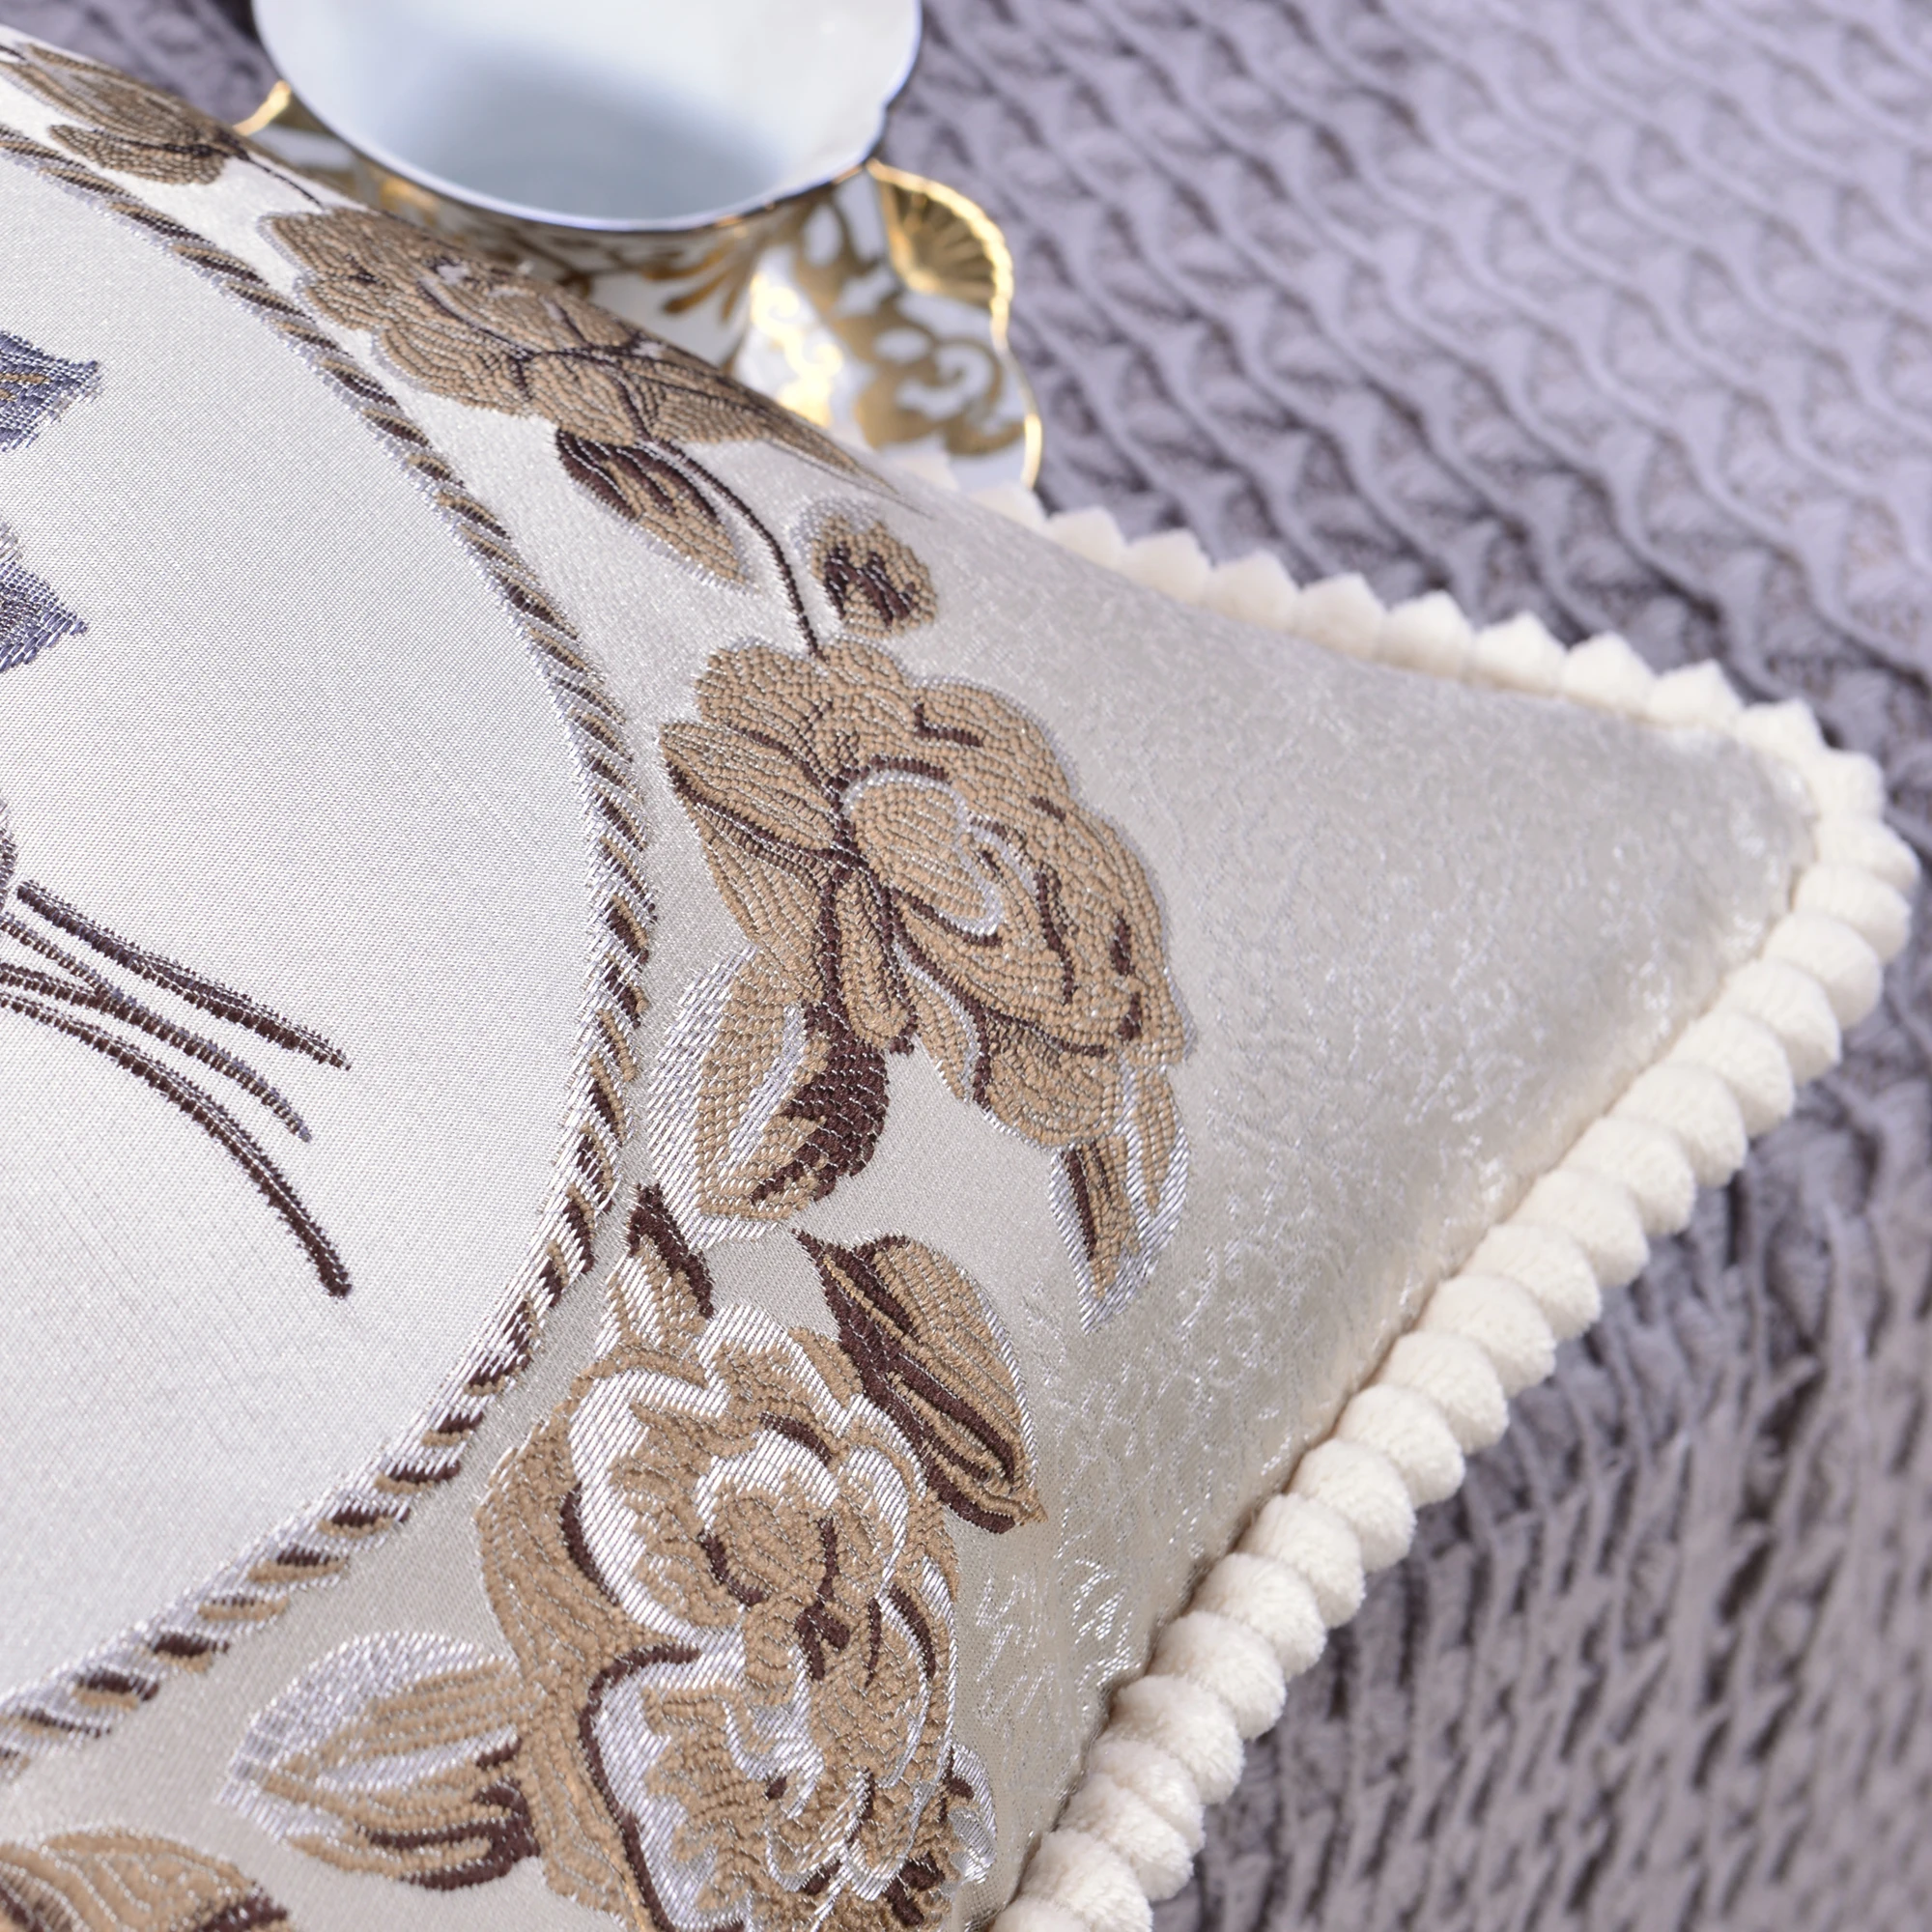 H7cb86ec7c93844cca0ddf1dbb05101d5c Embroidery Cushion Covers Pillow Cases Bead String Jacquard Pillowcase Throw for Car Living Office Bedroom Home Decoration 48x48